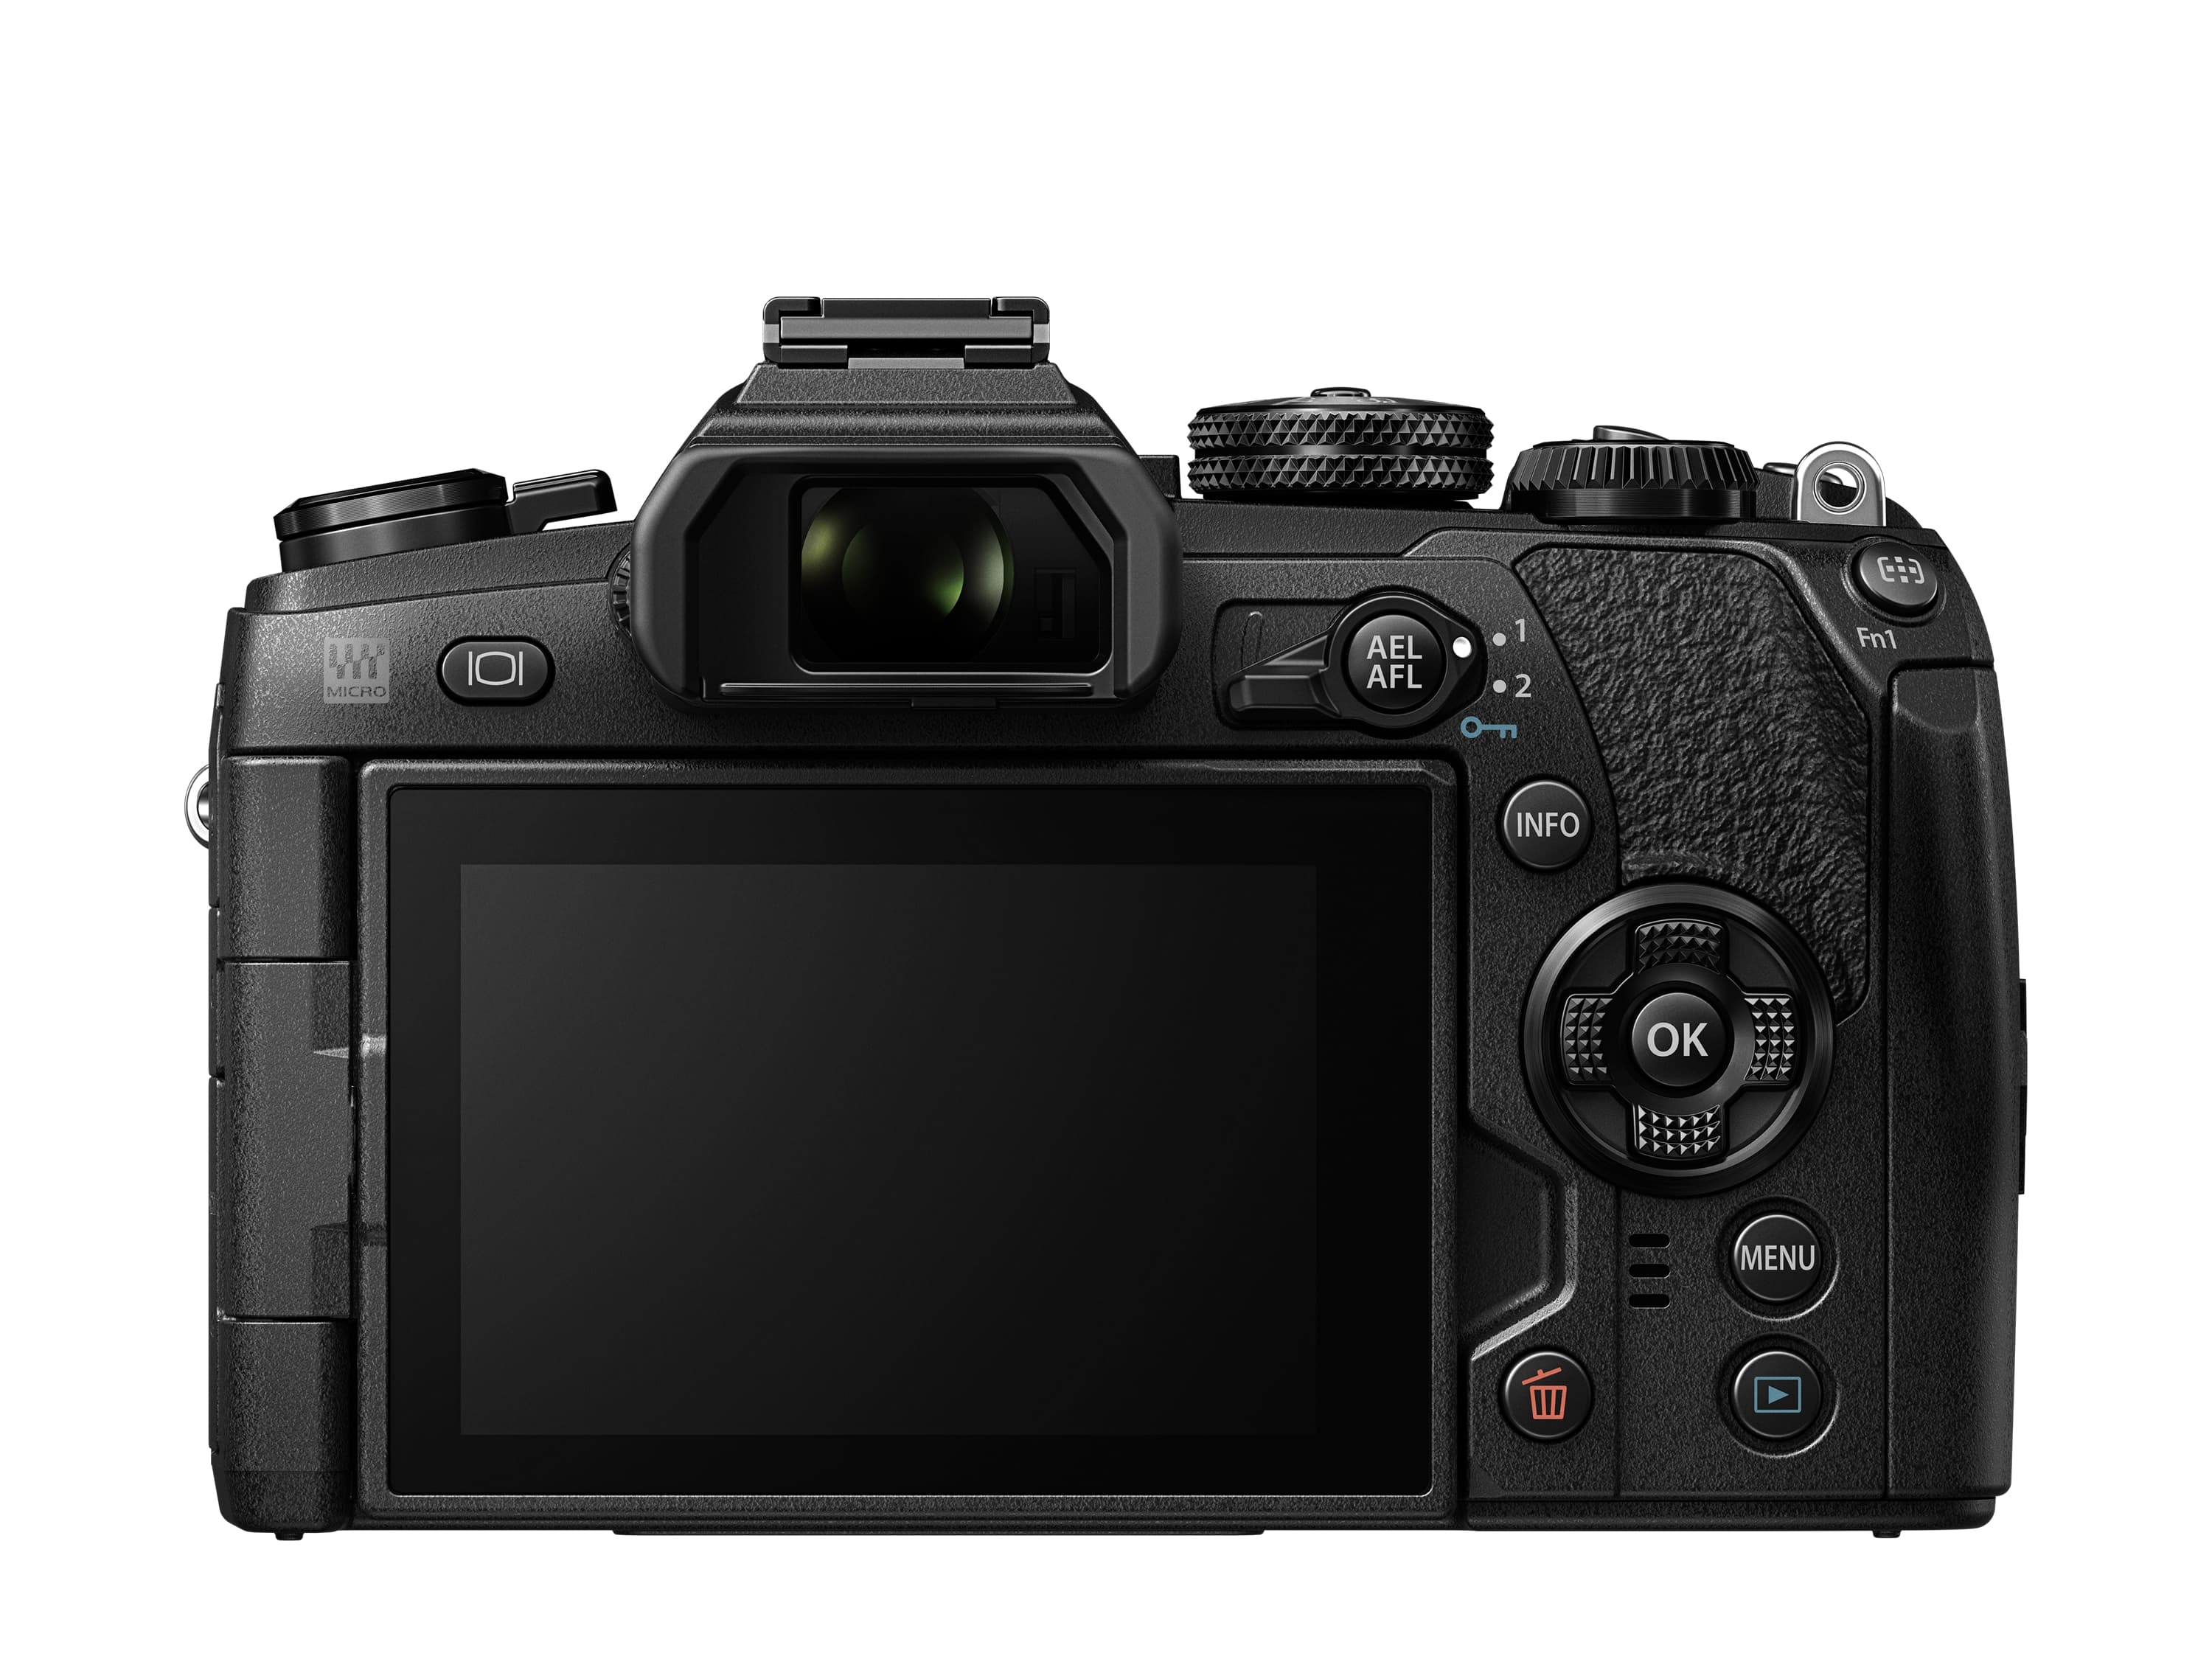 Olympus OM-D E-M1 Mark II price and release date confirmed 